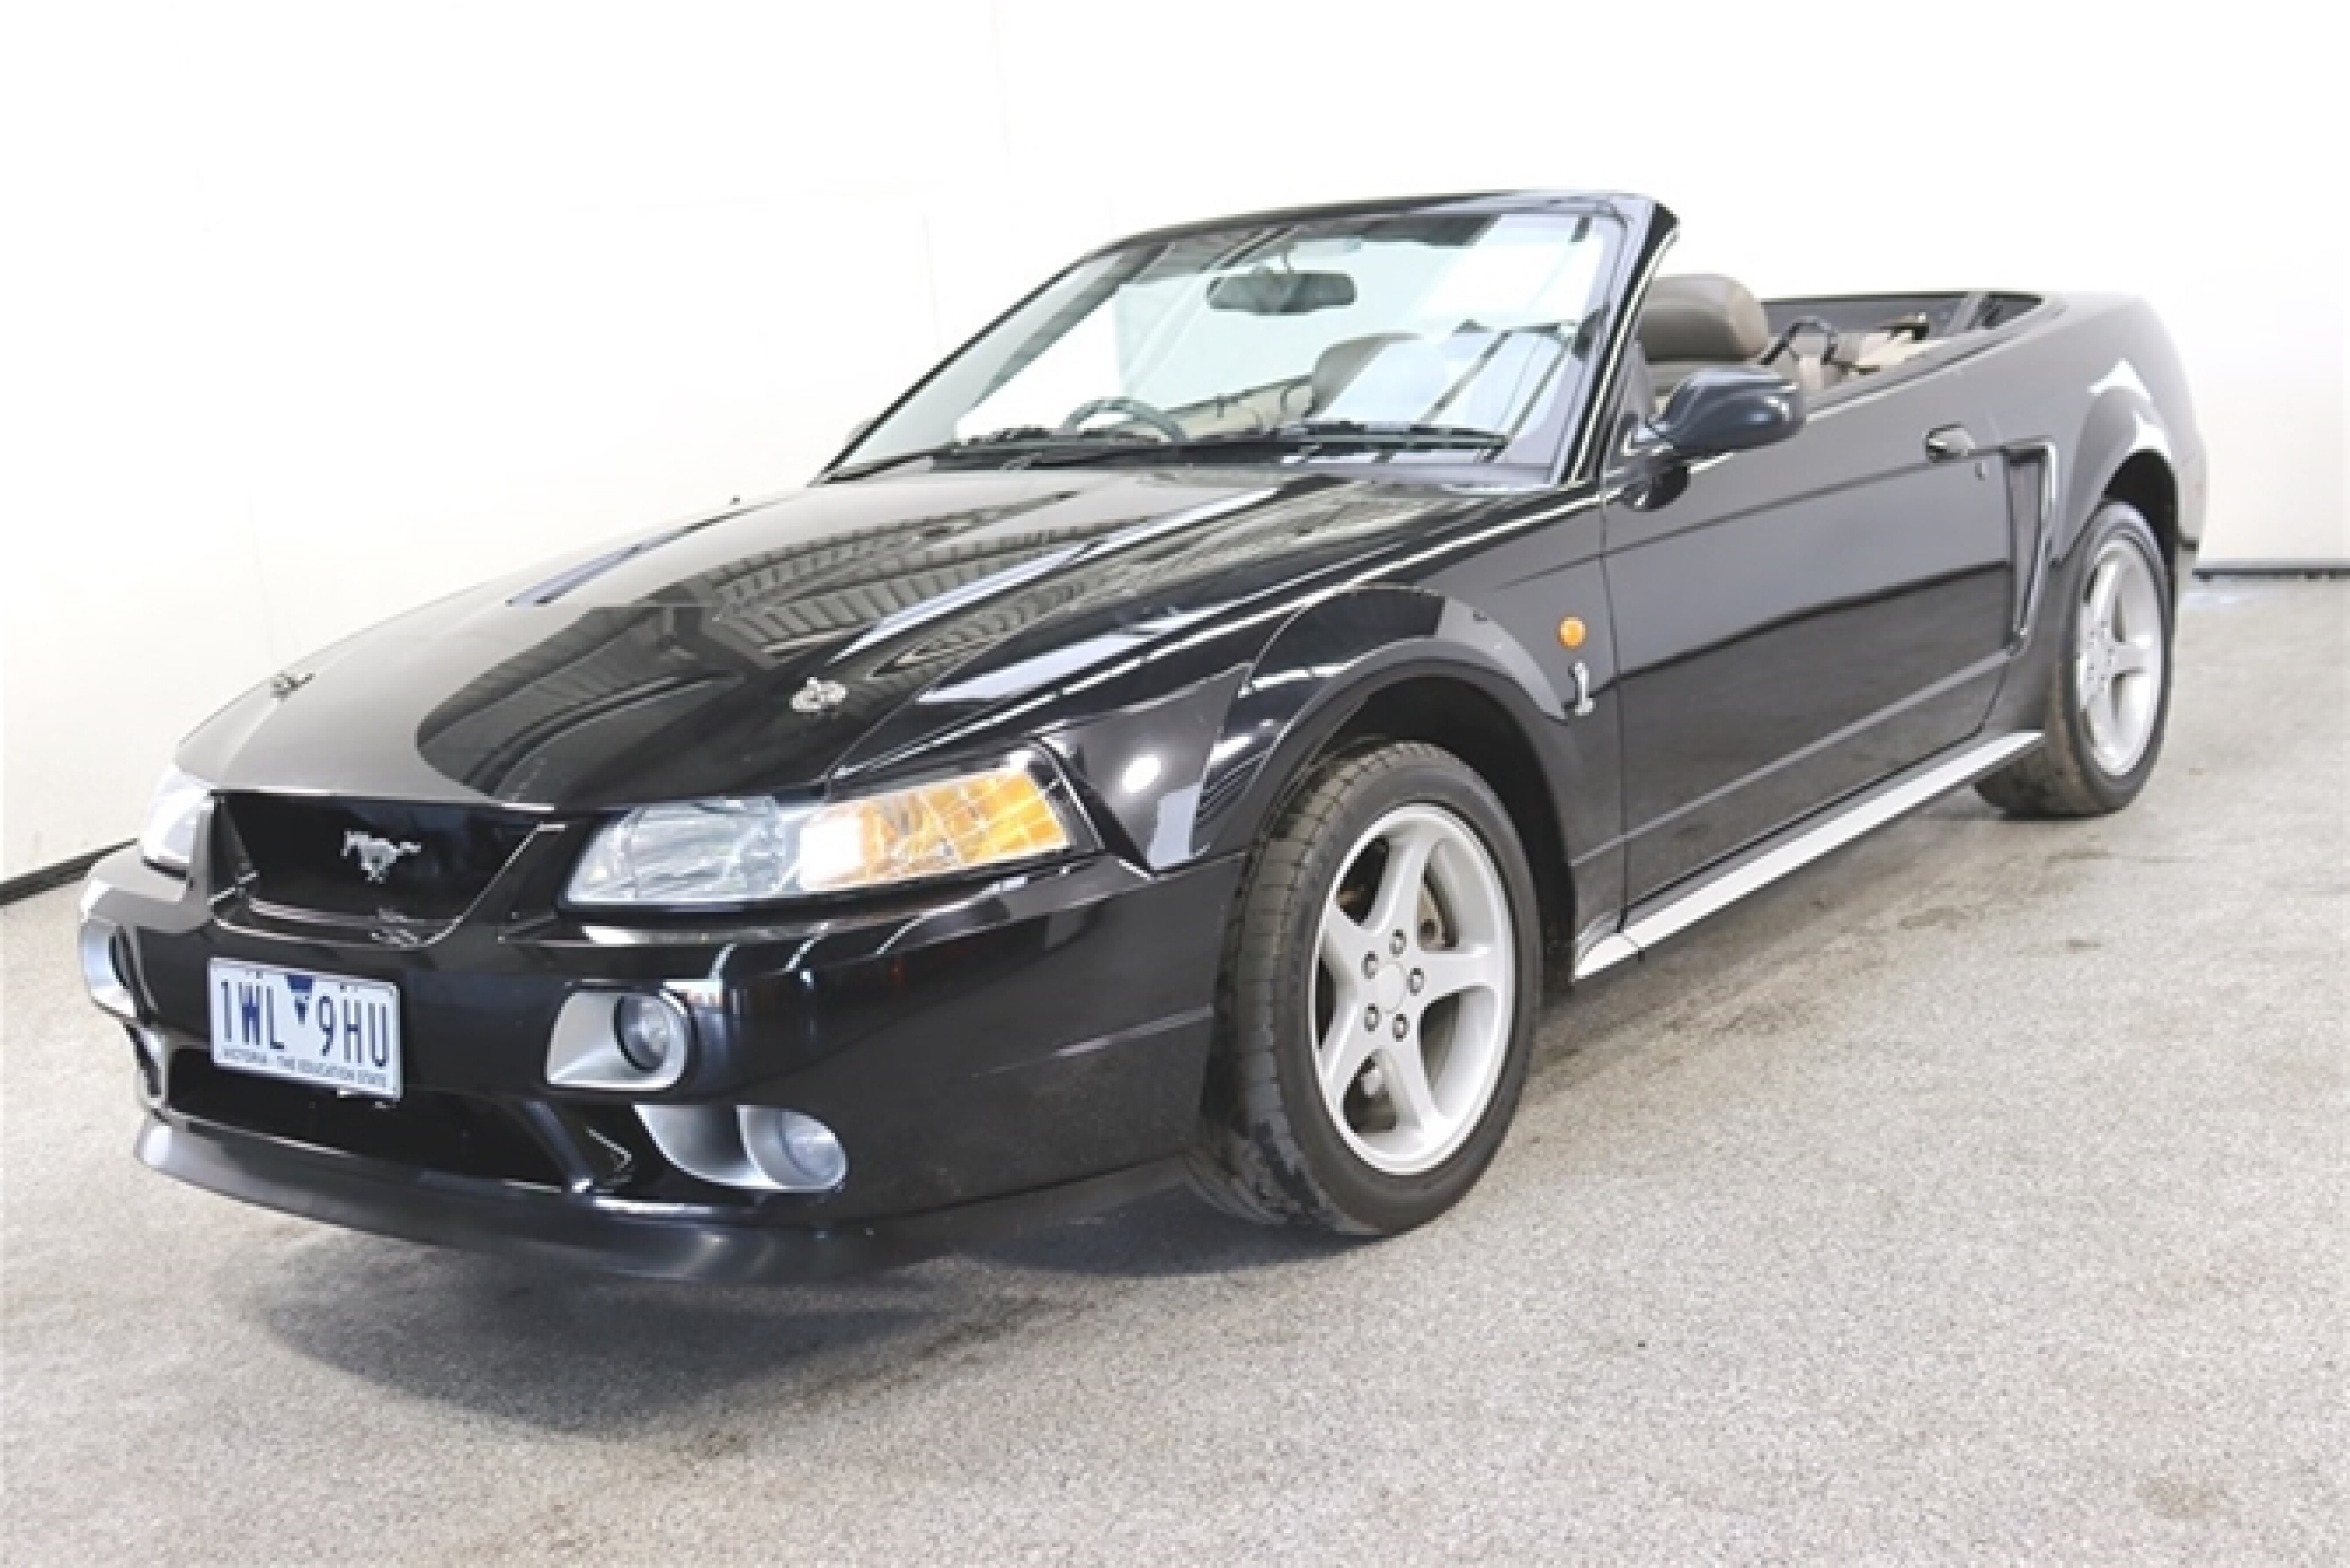 970f1bef/2001 ford mustang manual convertible grays auctions 1 jpg